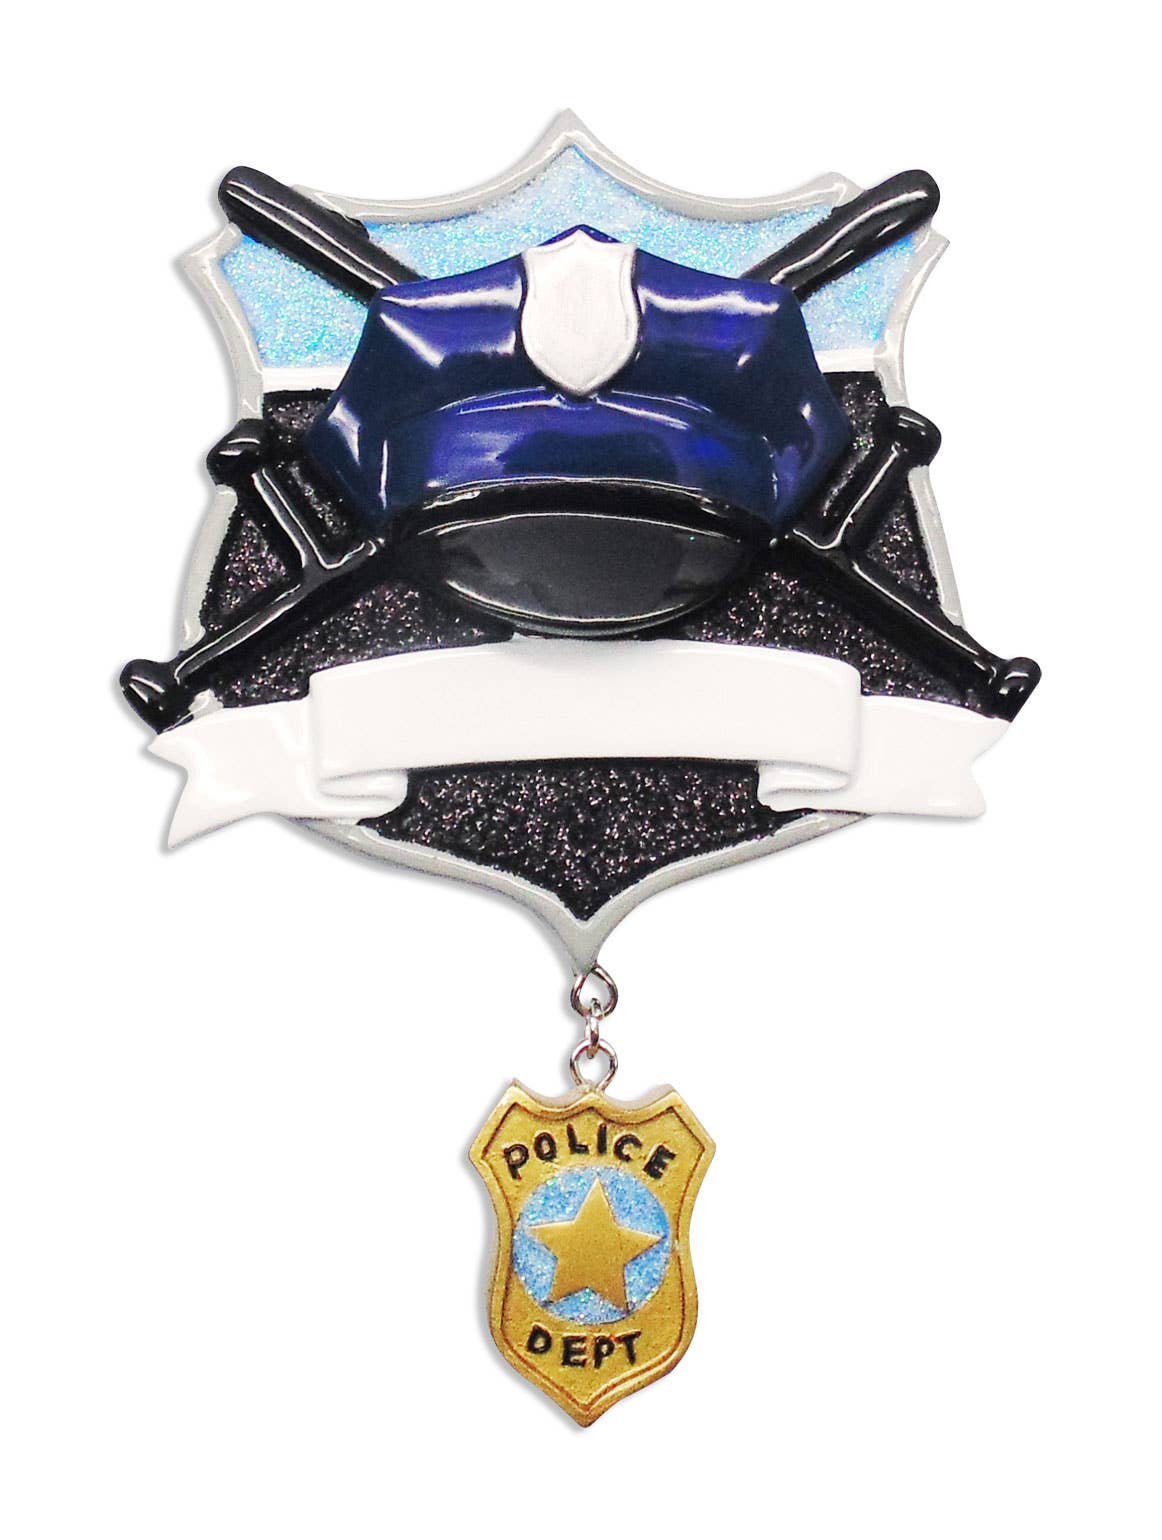 Policeman Personalized Ornament